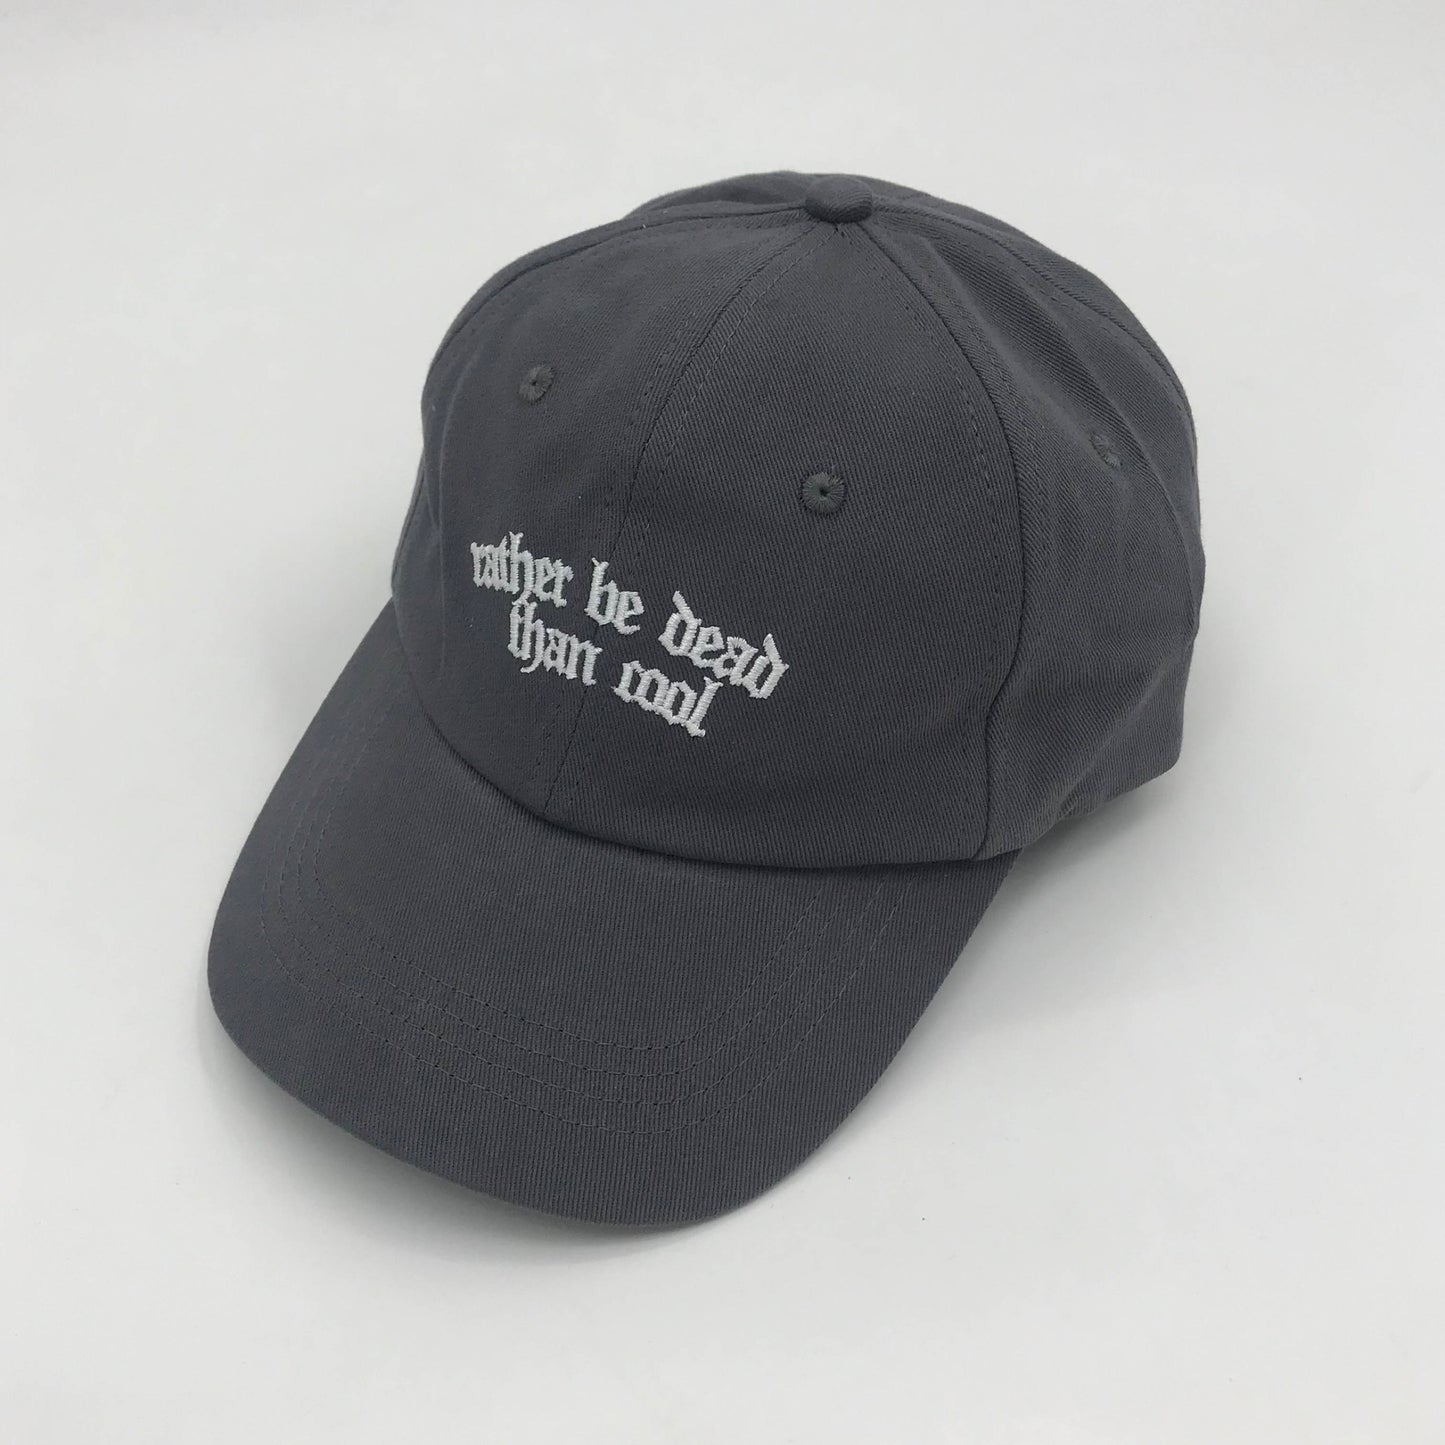 Rather Be Dead Than Cool Dad Cap